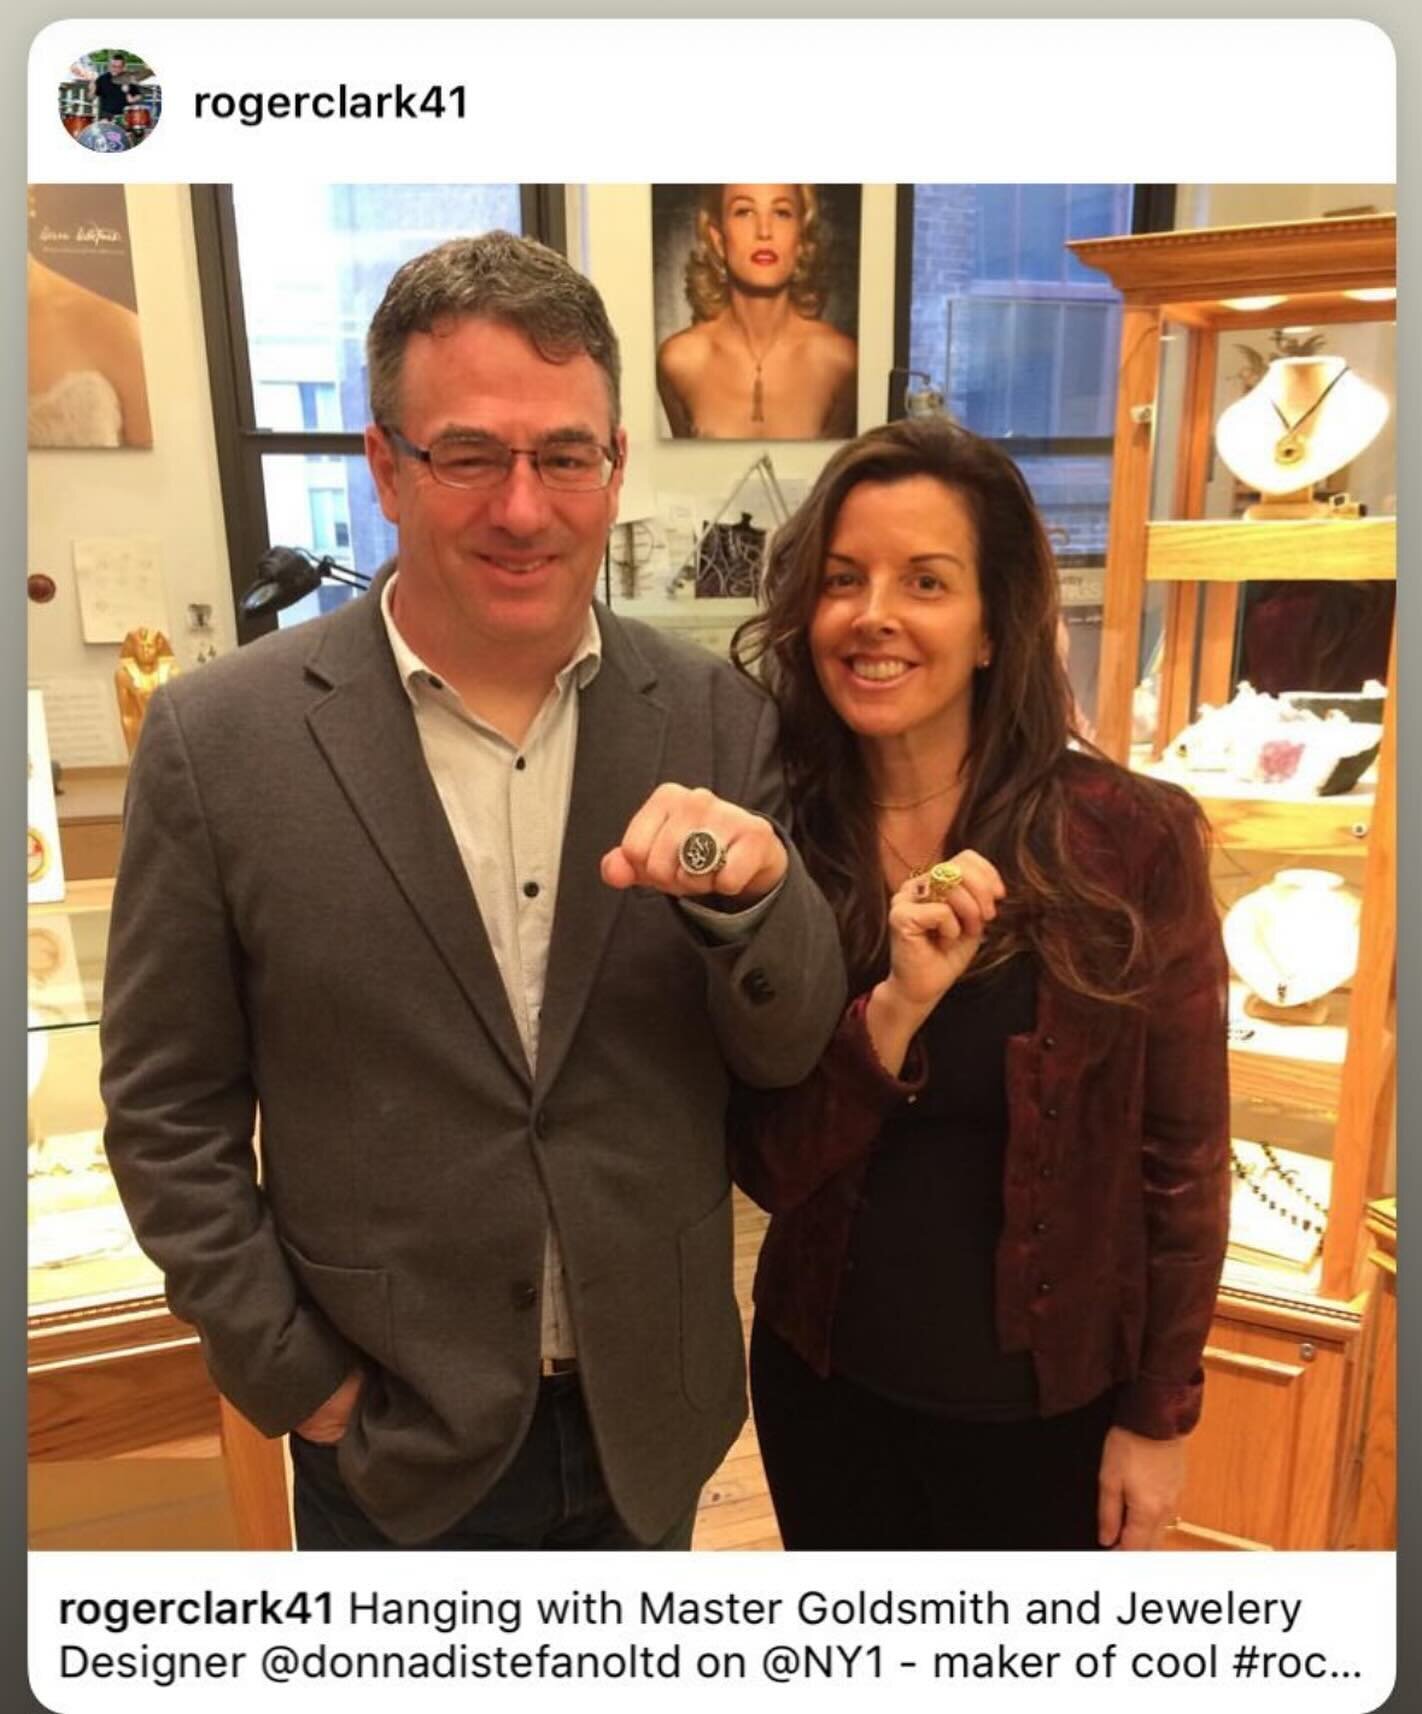 Throwback to when the charismatic Roger Clark came to visit and featured DD on NY1. We showed him our atelier and he had fun with the poison ring collection!

@rogerclark41 @ny1 #madeinnyc #womanownedbuisness #iloveny